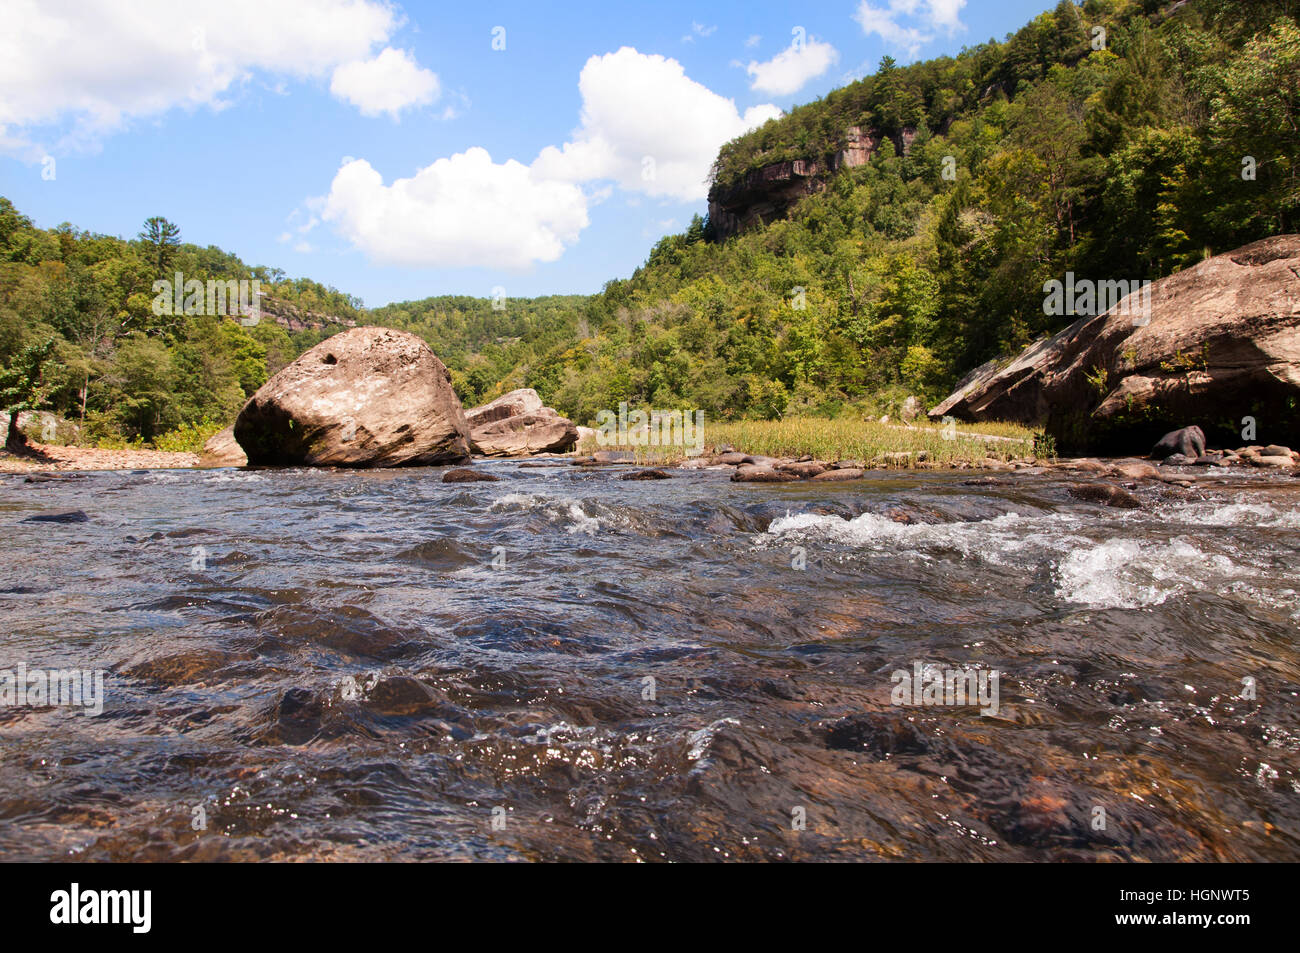 Small rapids on the Big South Fork of the Cumberland River neat Stearns, Kentucky. Stock Photo